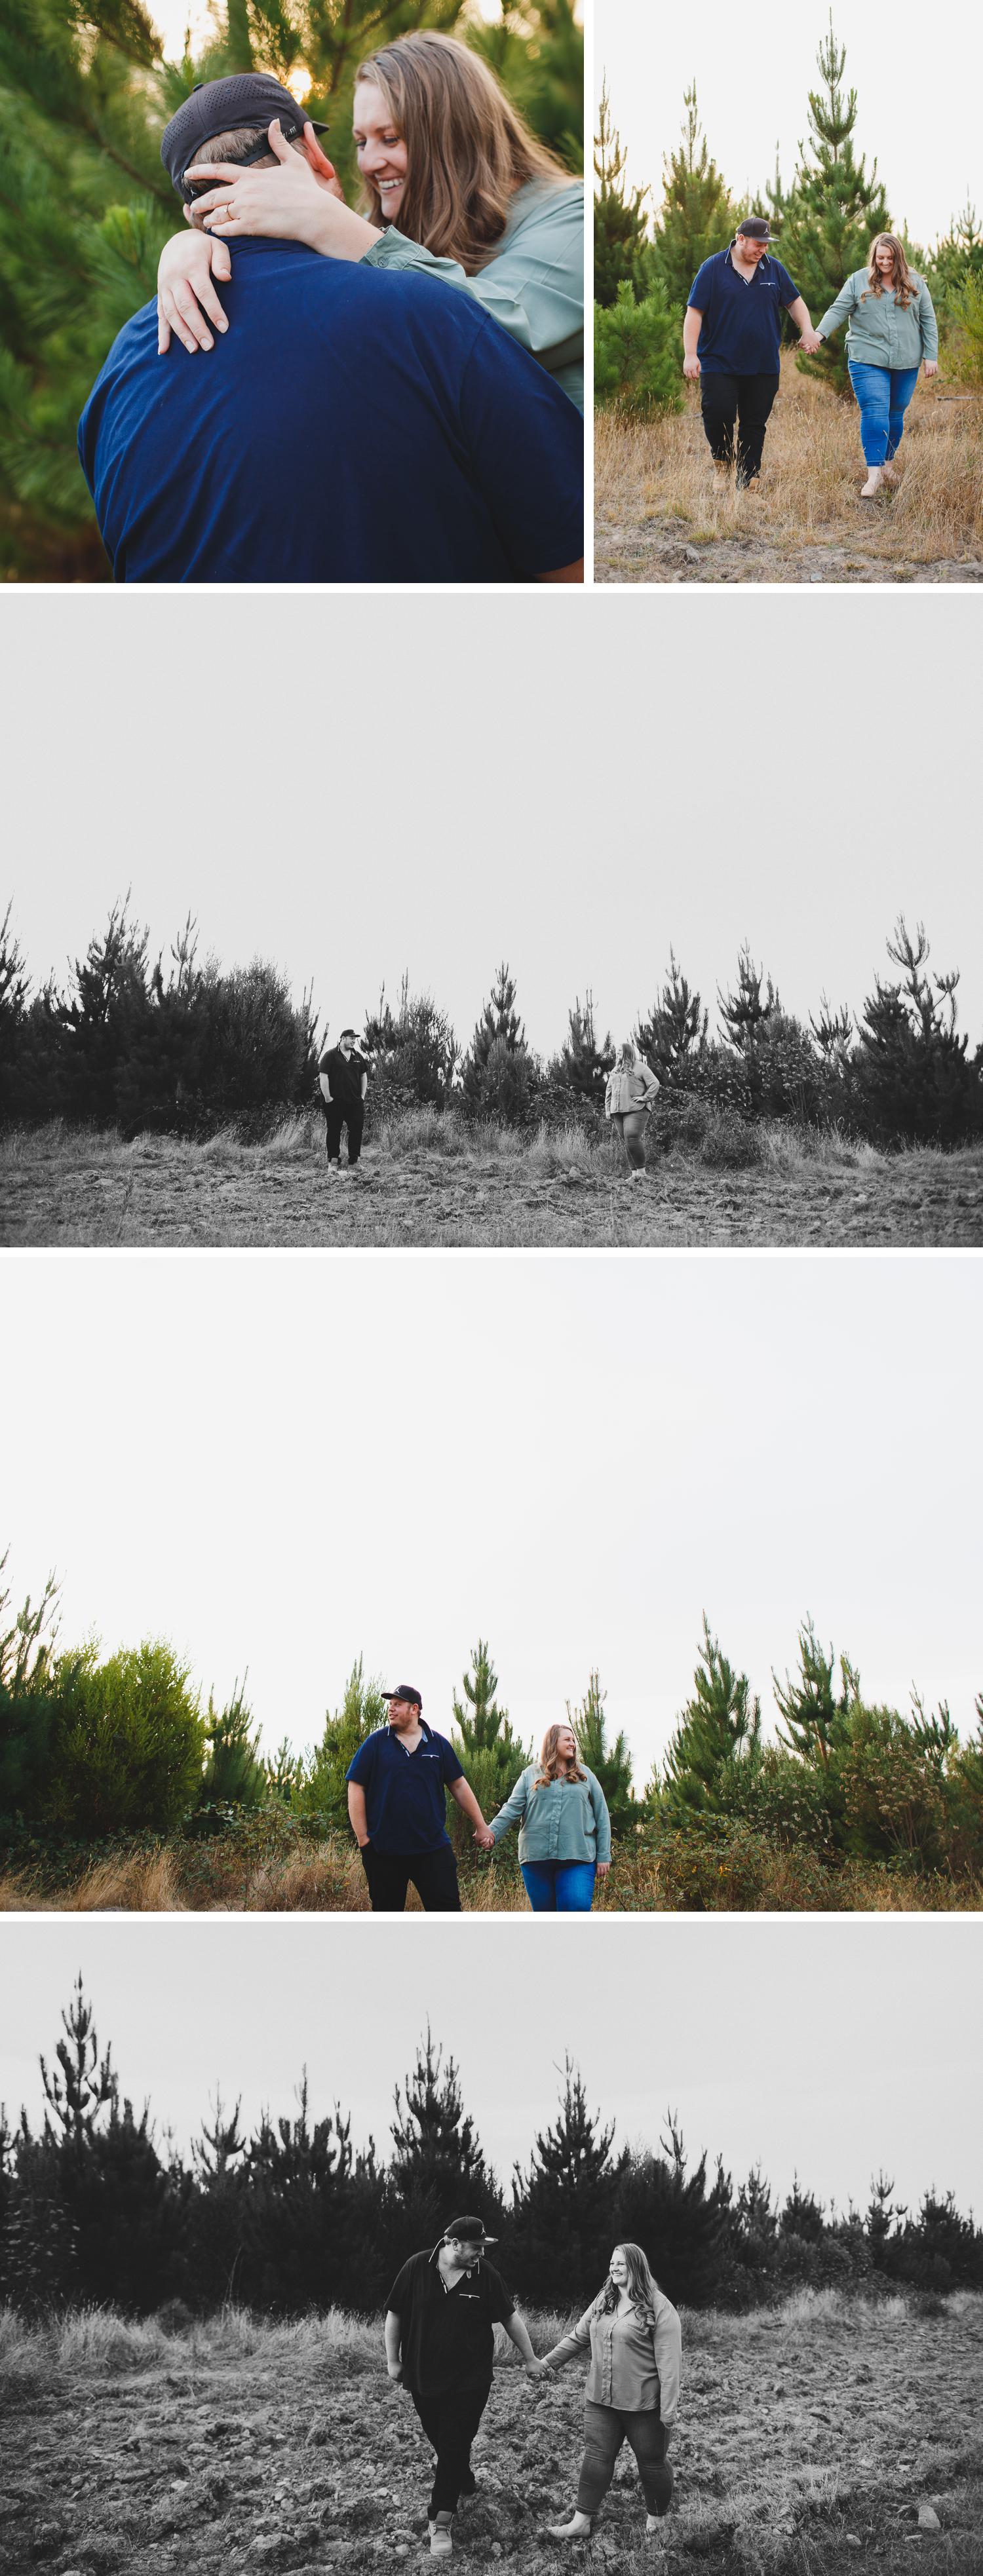 Gippsland Engagement Shoot Bush Themed, Forrest Trees Photo, Bride and Groom Embracing Photo by Danae Studios